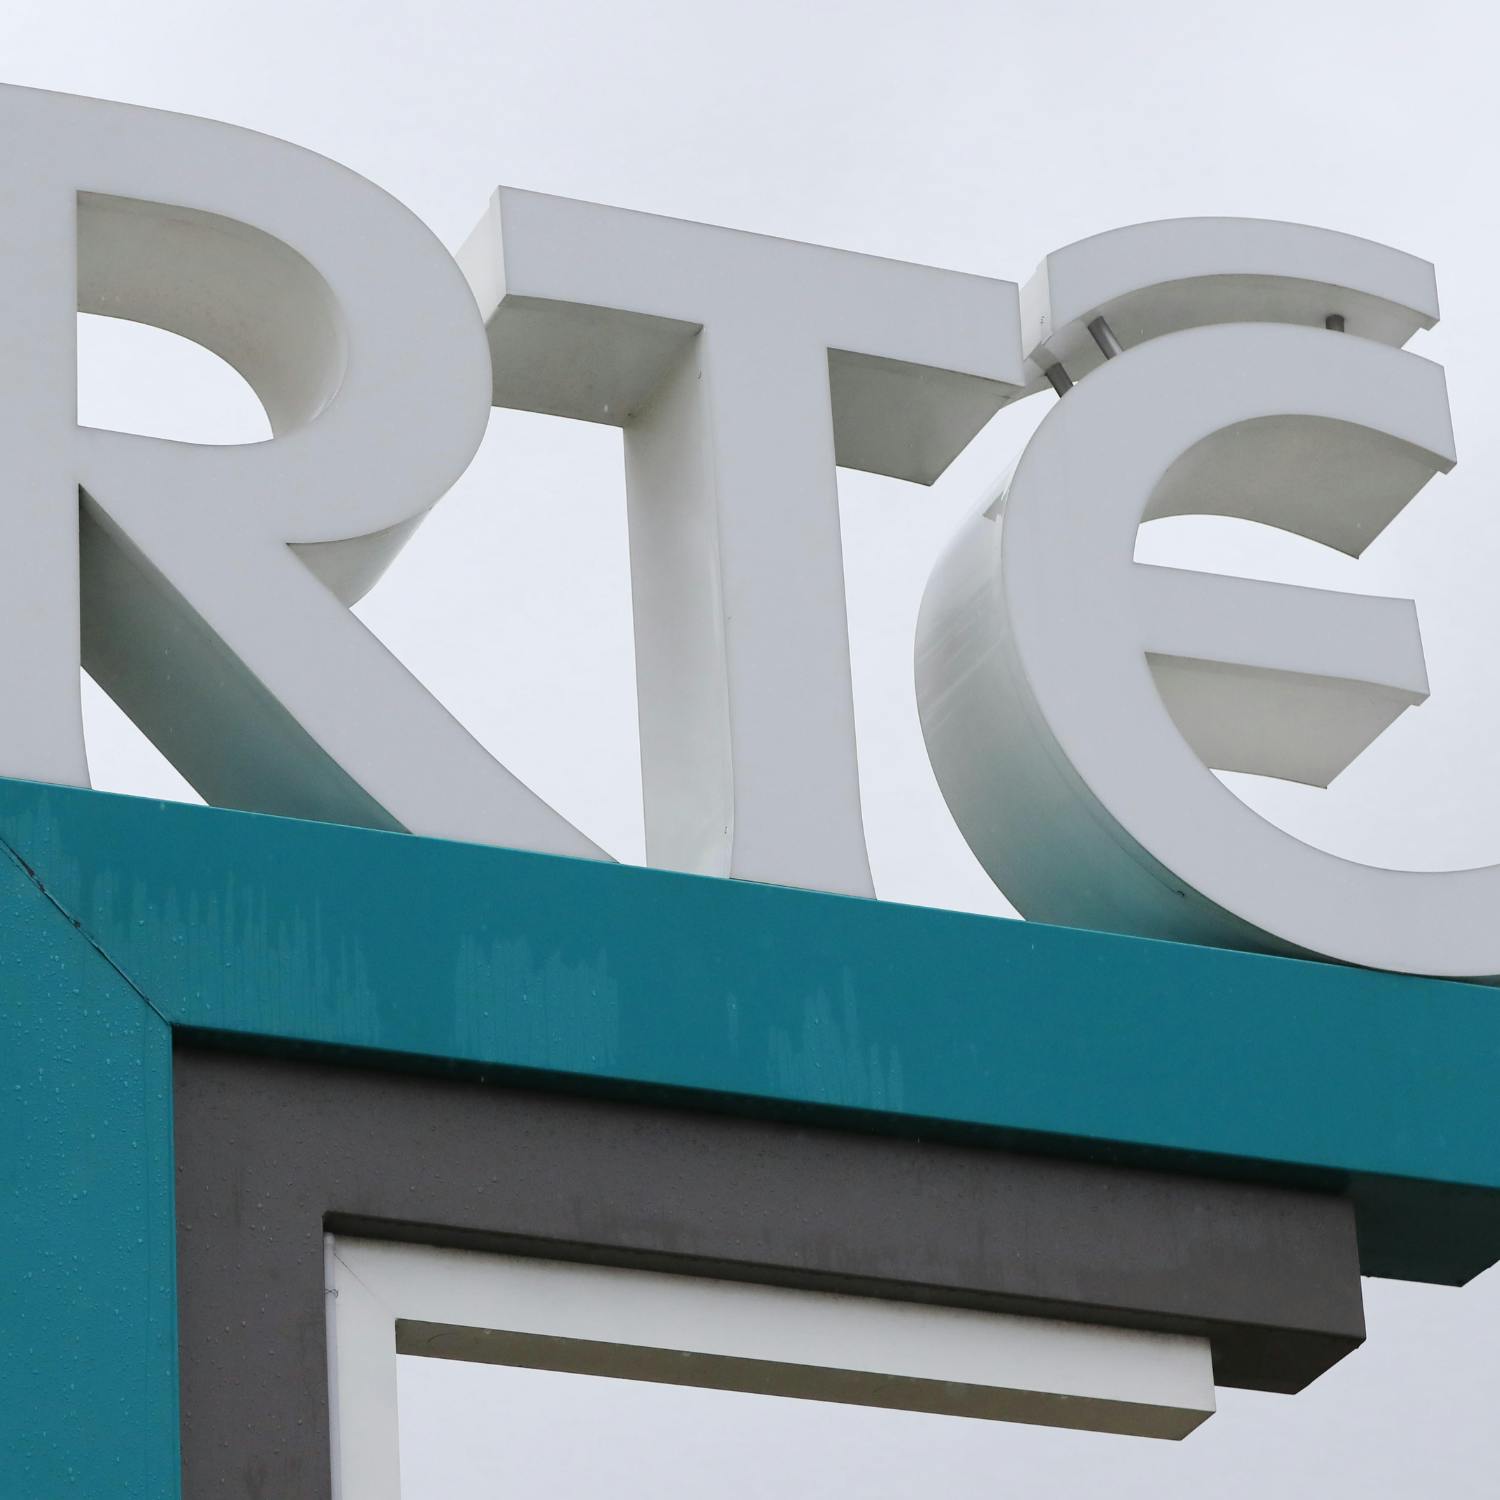 A new direction for RTE, but will it fix the problems?